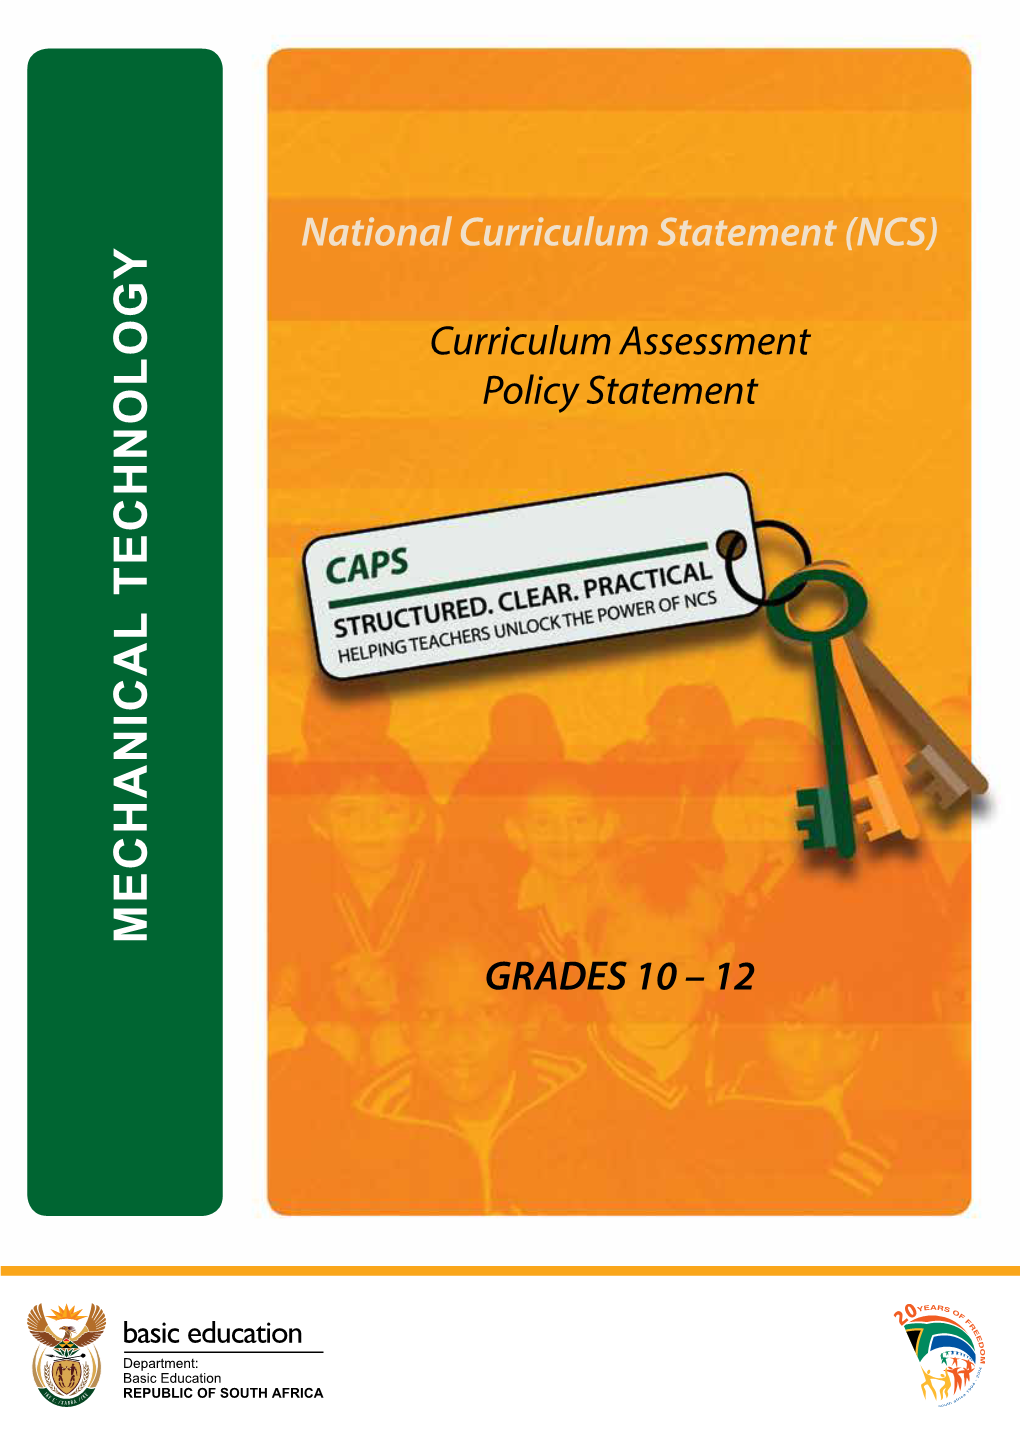 MECHANICAL TECHNOLOGY National Curriculum Statement (NCS) Curriculum Assessment Policy Statement GRADES 10–12 GRADES Department of Basic Education